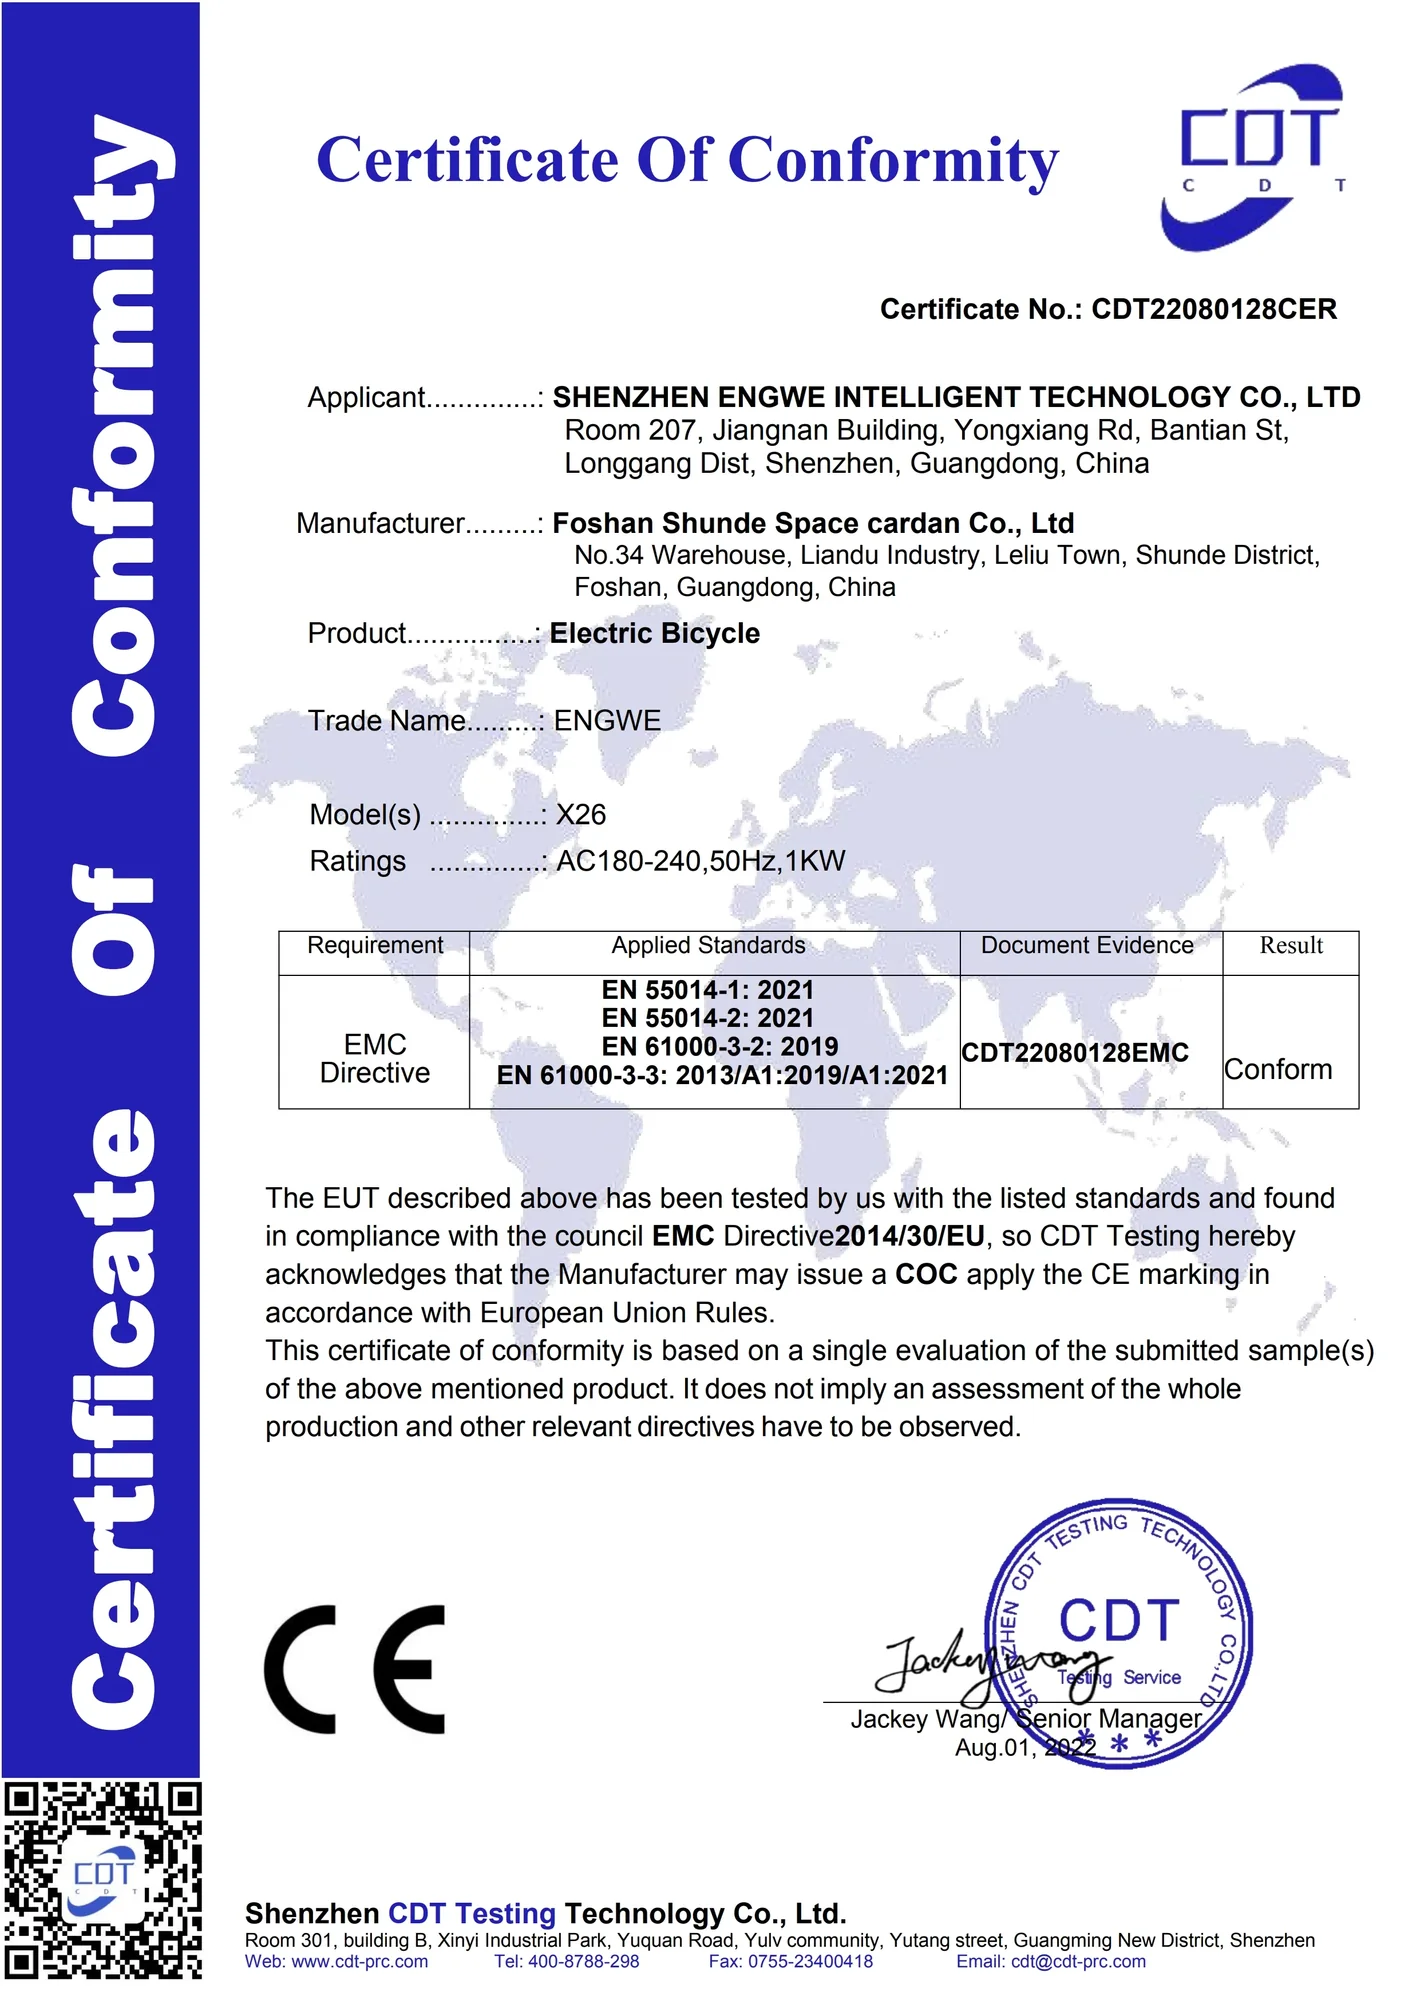 product certificate of conformity template, product certificate of conformity (pcoc), saber product certificate of conformity, supplier certificate of conformity, certificate of conformity drug product, certificate of conformity medicinal product, declaration of conformity medical device template